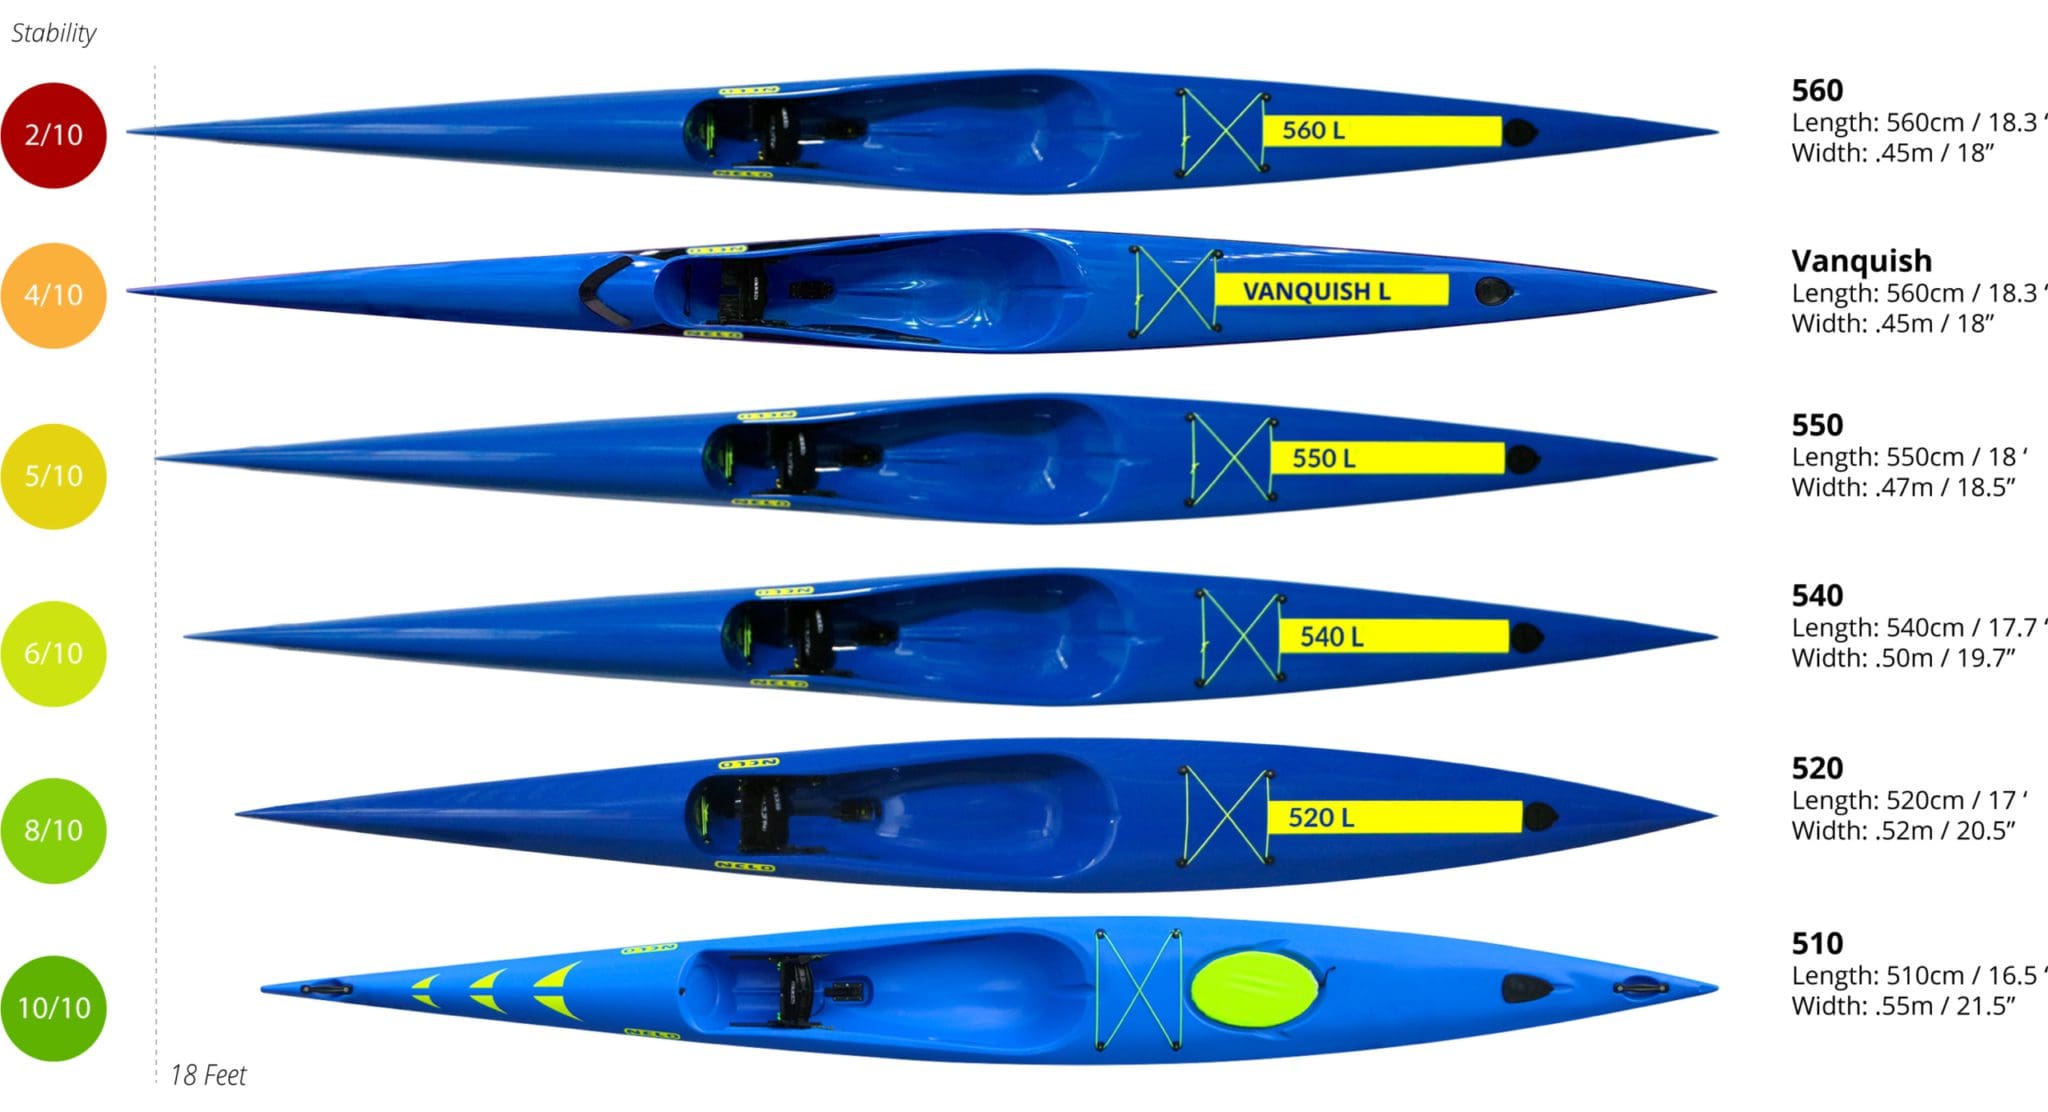 Review of Nelo 550 Surfski SCS and WWR Constructions, chart of all Nelo surfskis